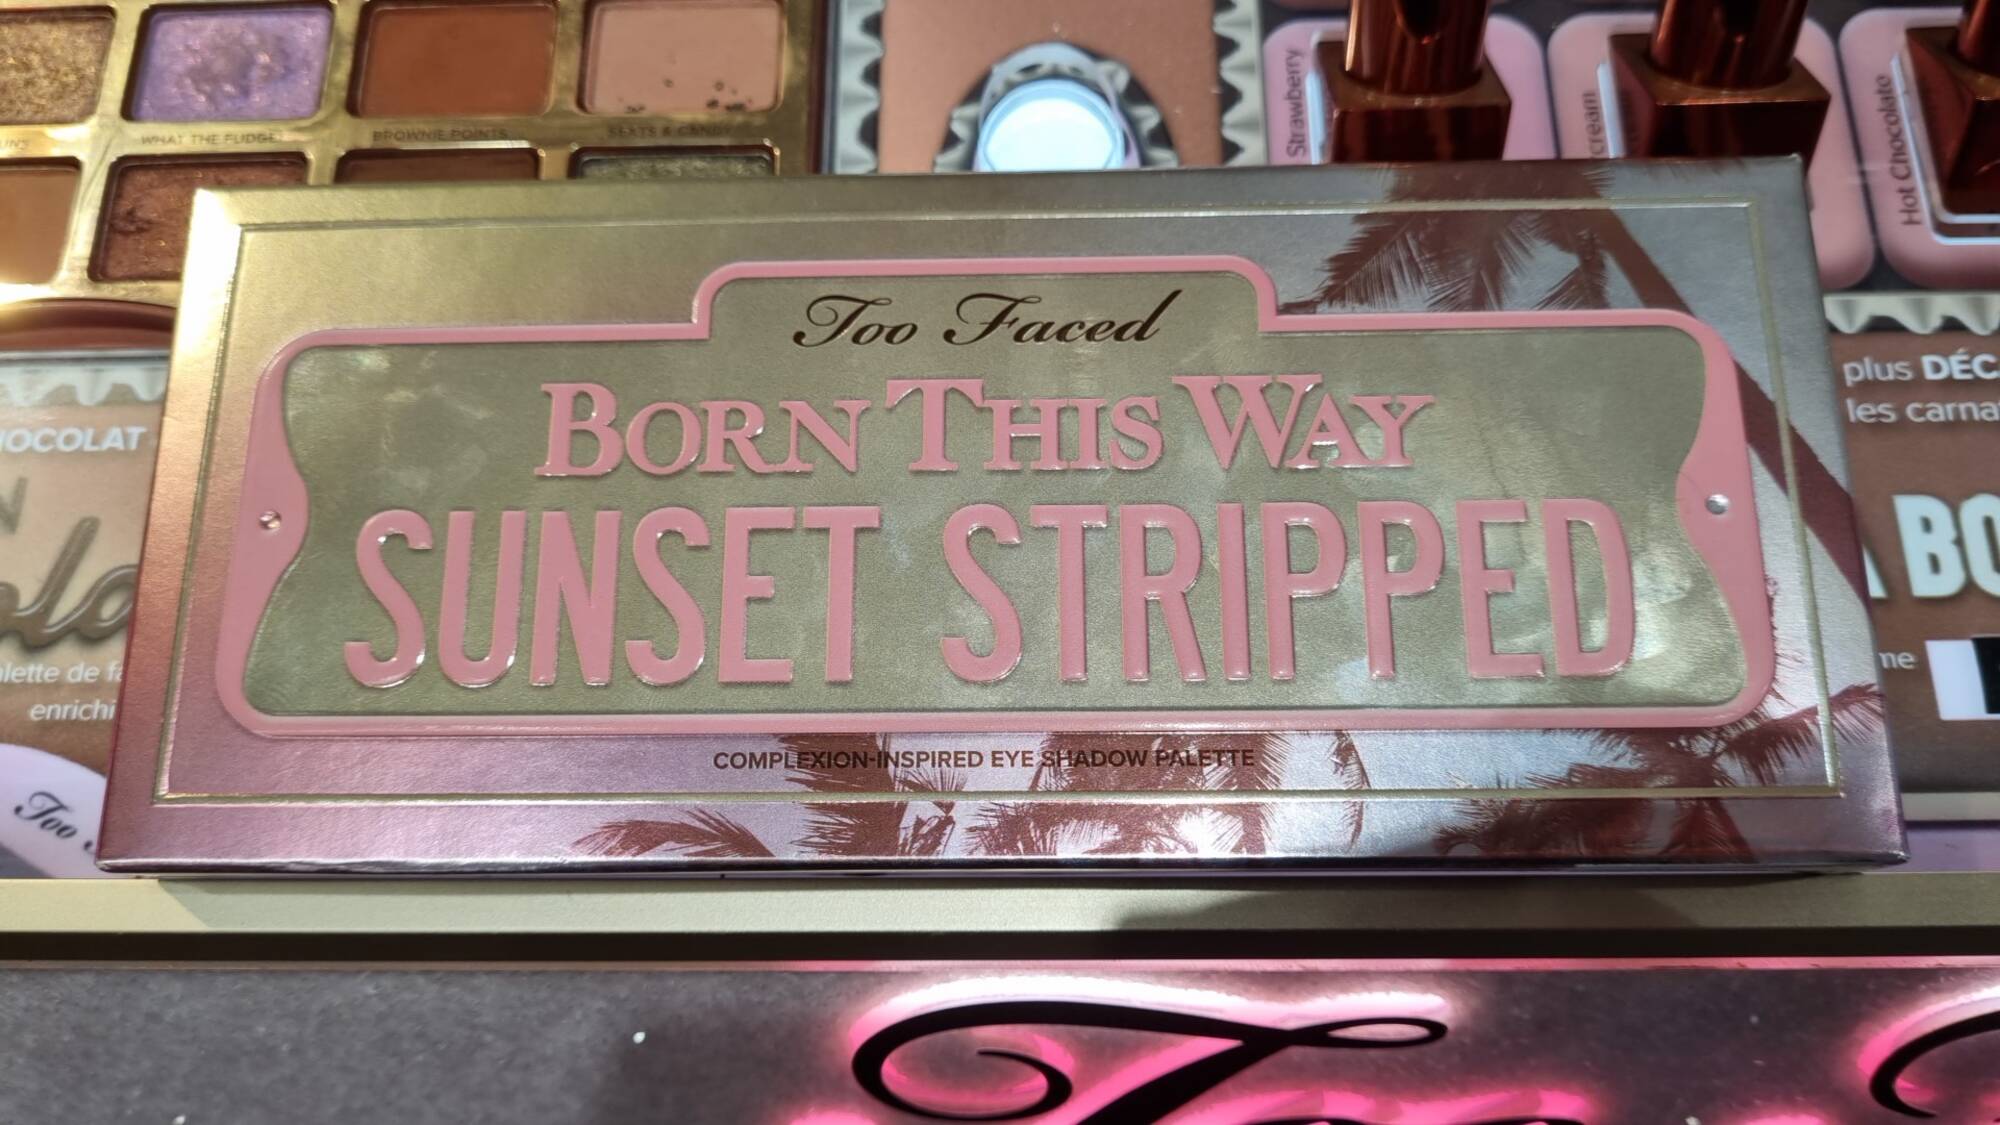 TOO FACED - Born this way sunset stripped - Eyeshadow palette